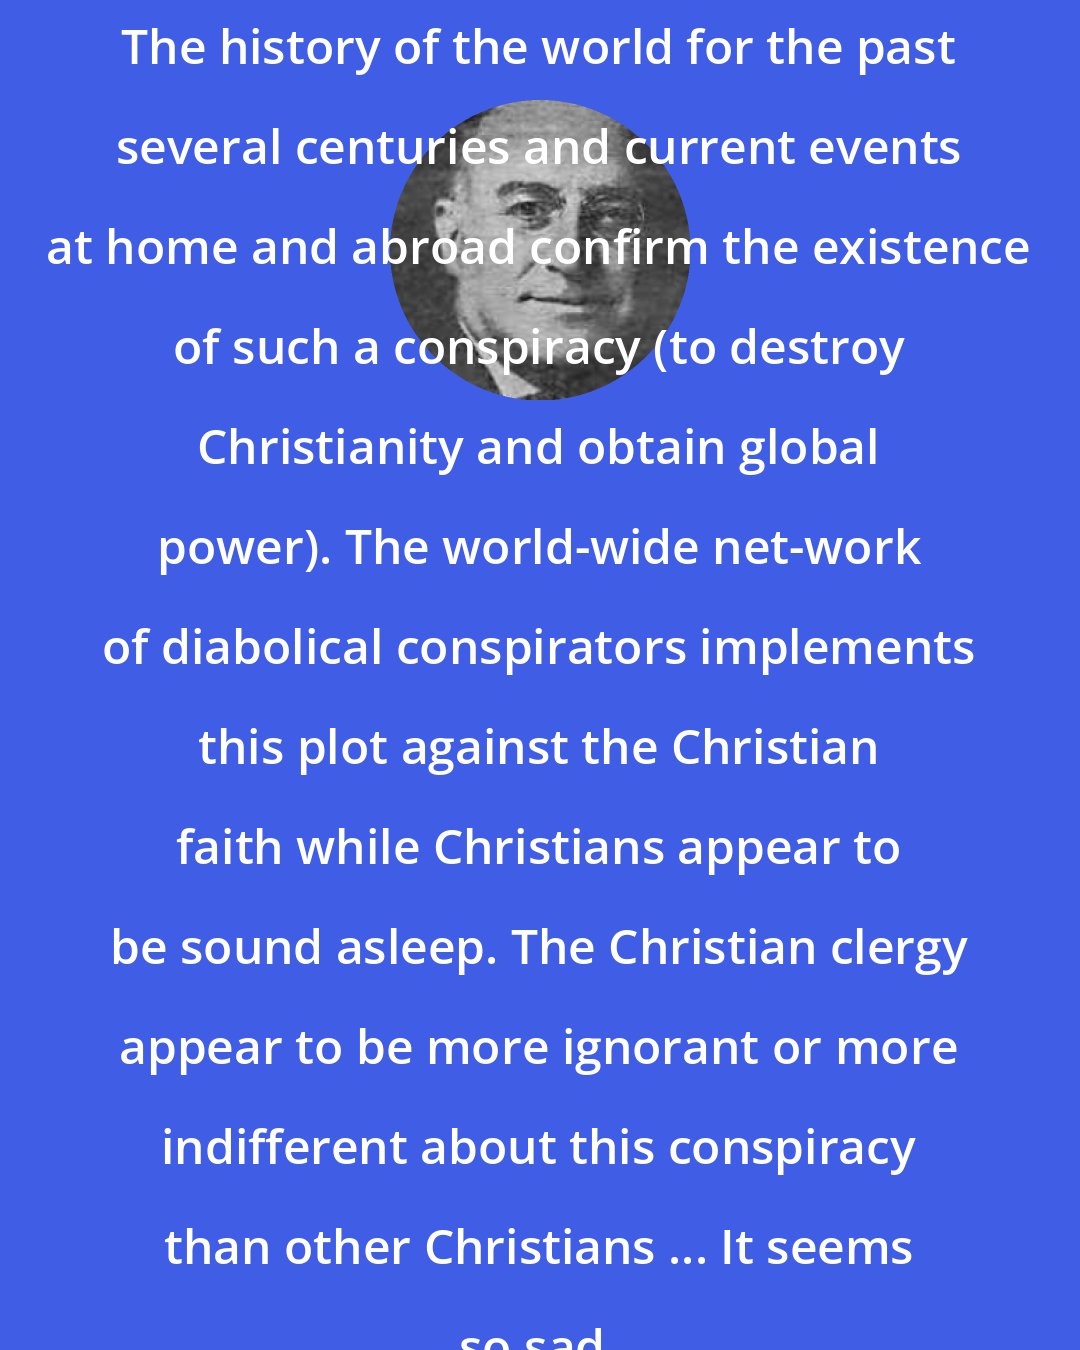 Benjamin H. Freedman: The history of the world for the past several centuries and current events at home and abroad confirm the existence of such a conspiracy (to destroy Christianity and obtain global power). The world-wide net-work of diabolical conspirators implements this plot against the Christian faith while Christians appear to be sound asleep. The Christian clergy appear to be more ignorant or more indifferent about this conspiracy than other Christians ... It seems so sad.